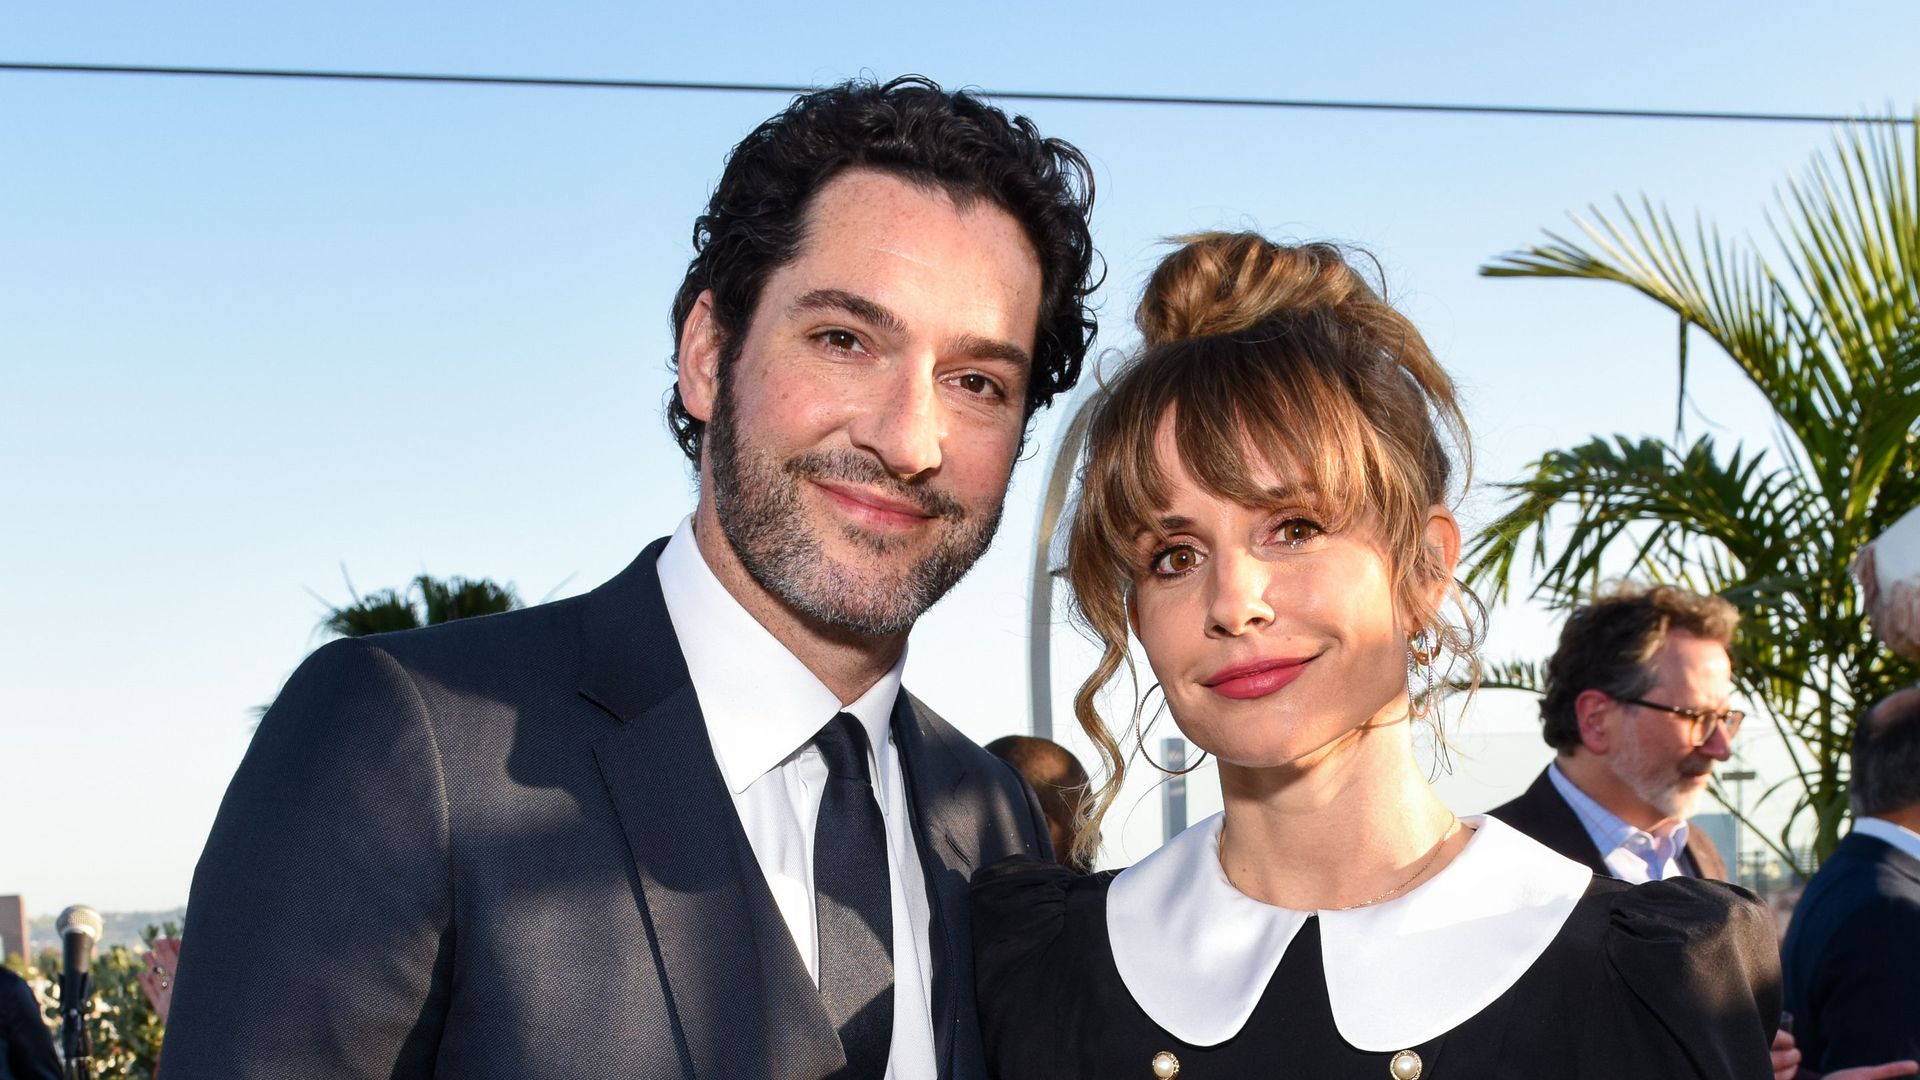 Lucifer star Tom Ellis welcomes first child with wife Meaghan Oppenheimer – adorable baby photos